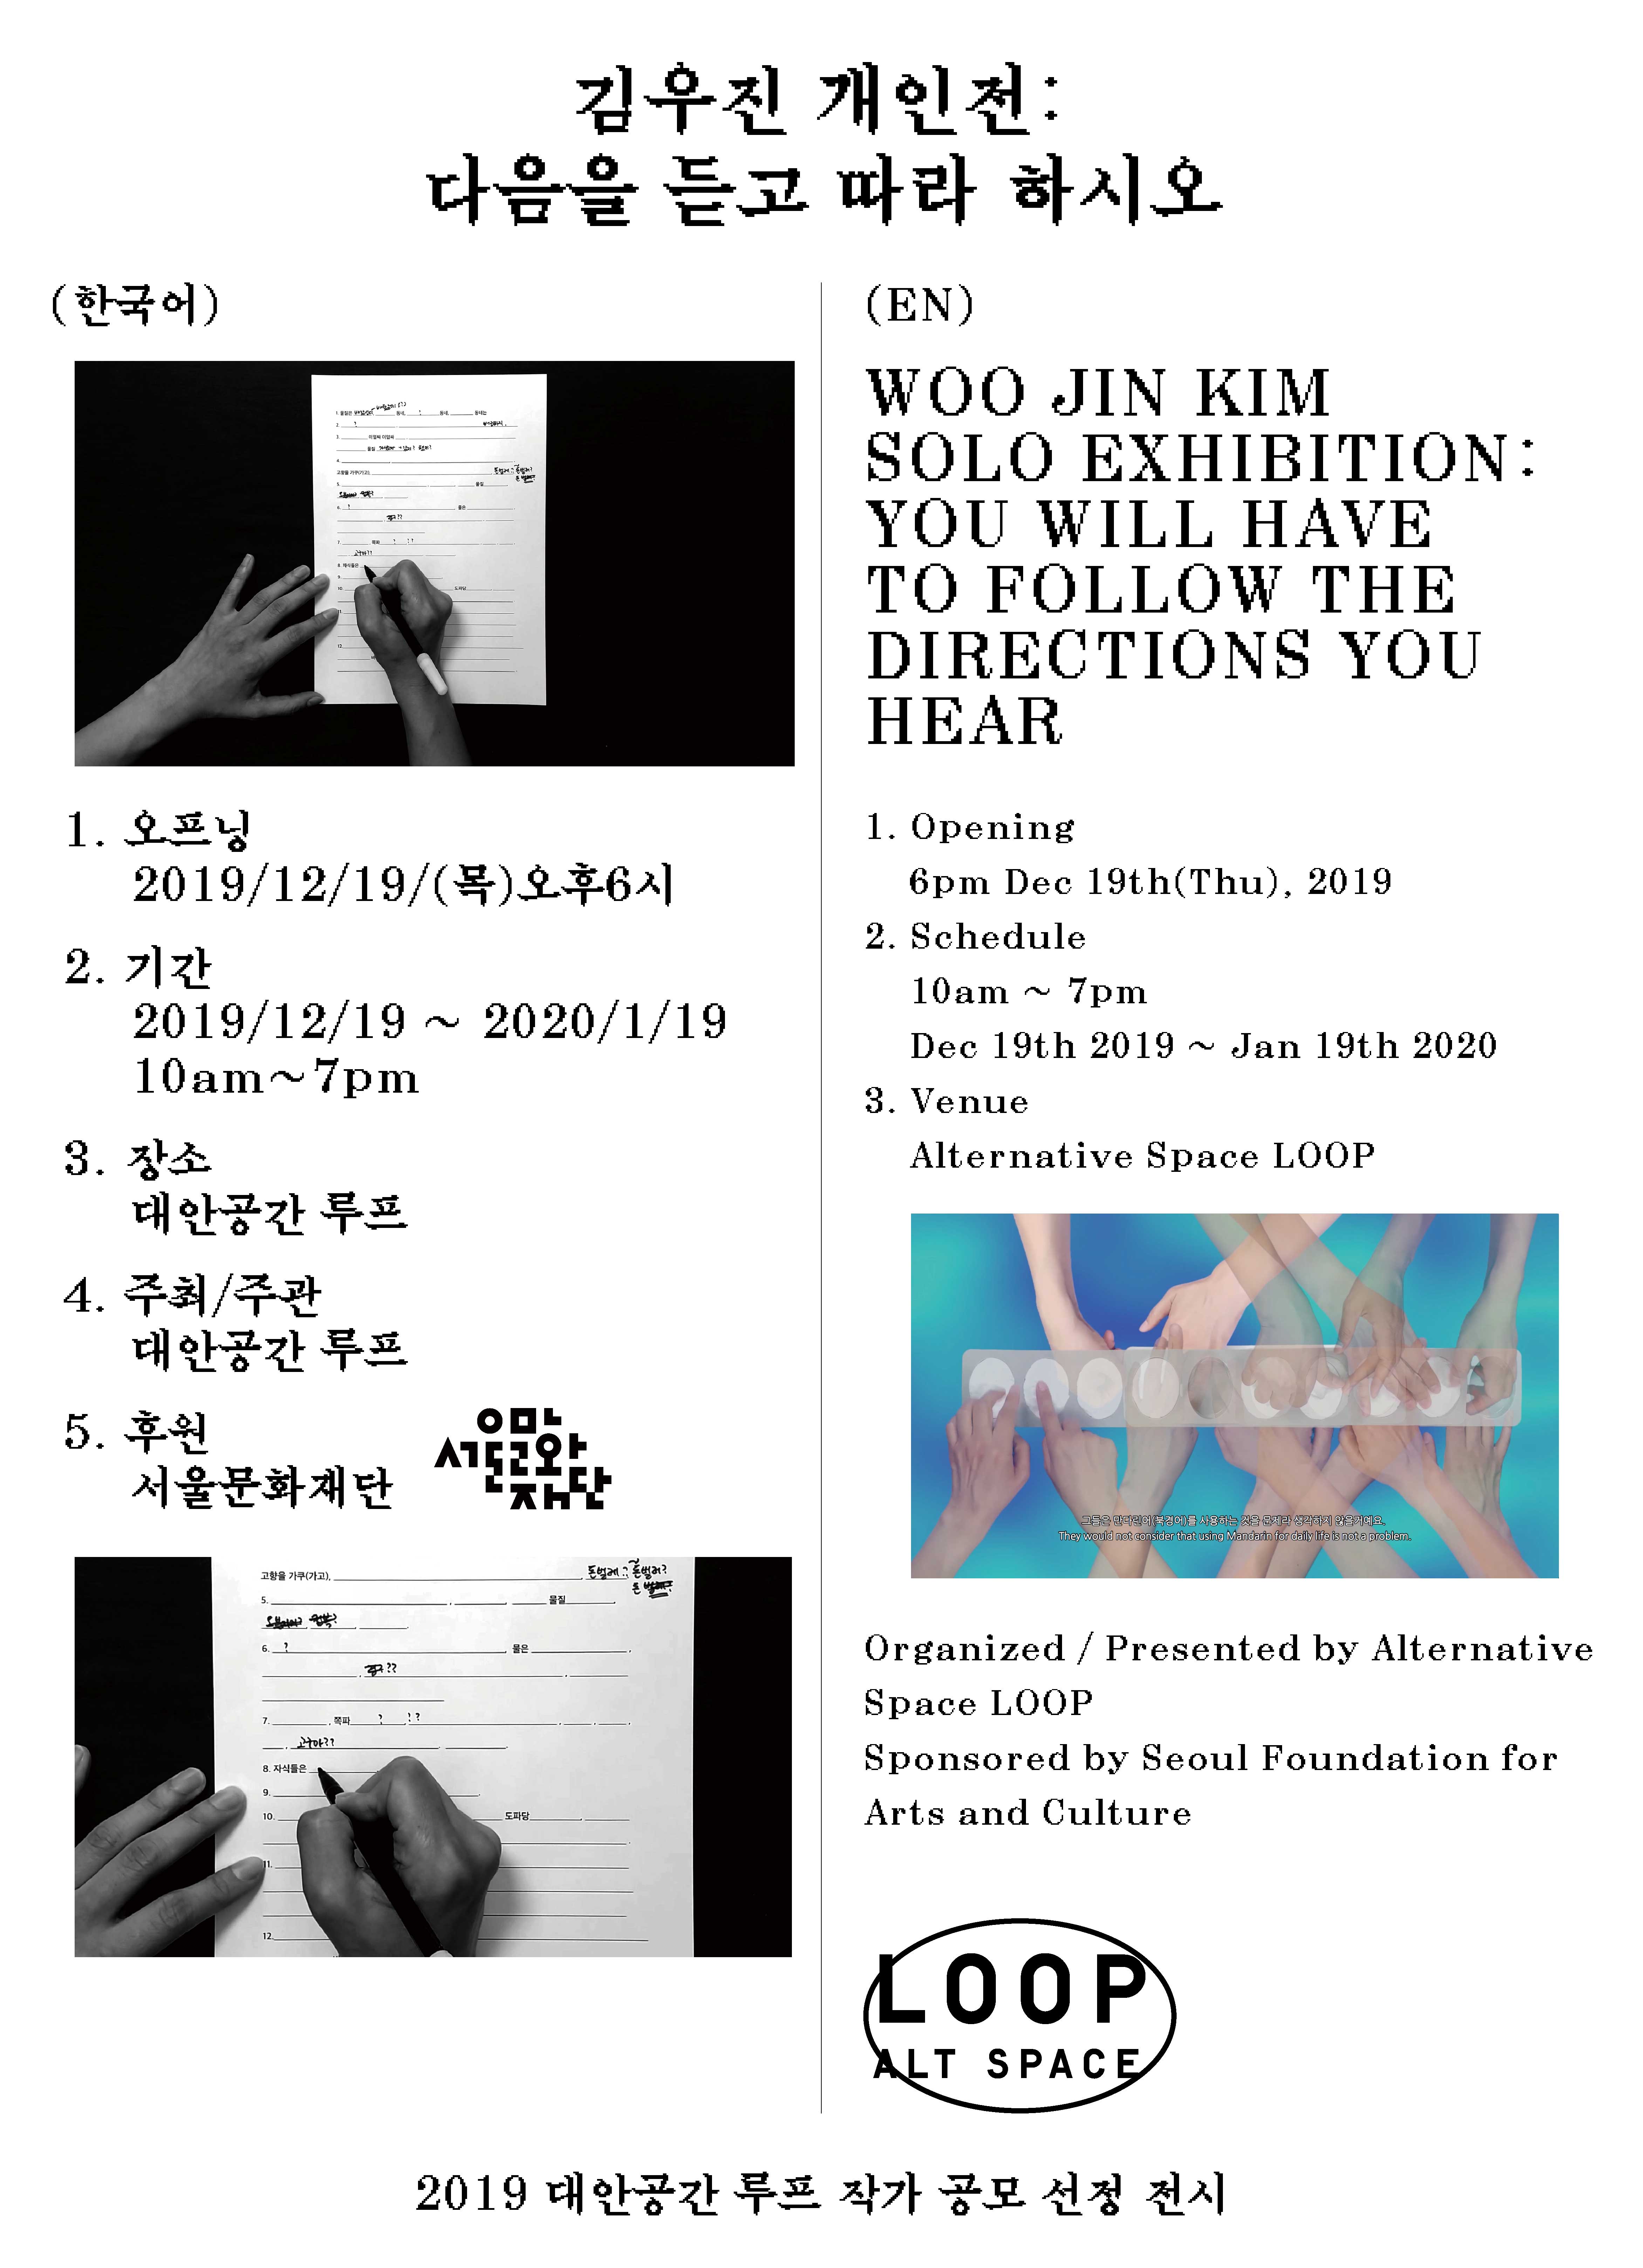 Woo Jin Kim Solo Exhibition: You will have to follow the directions you hear